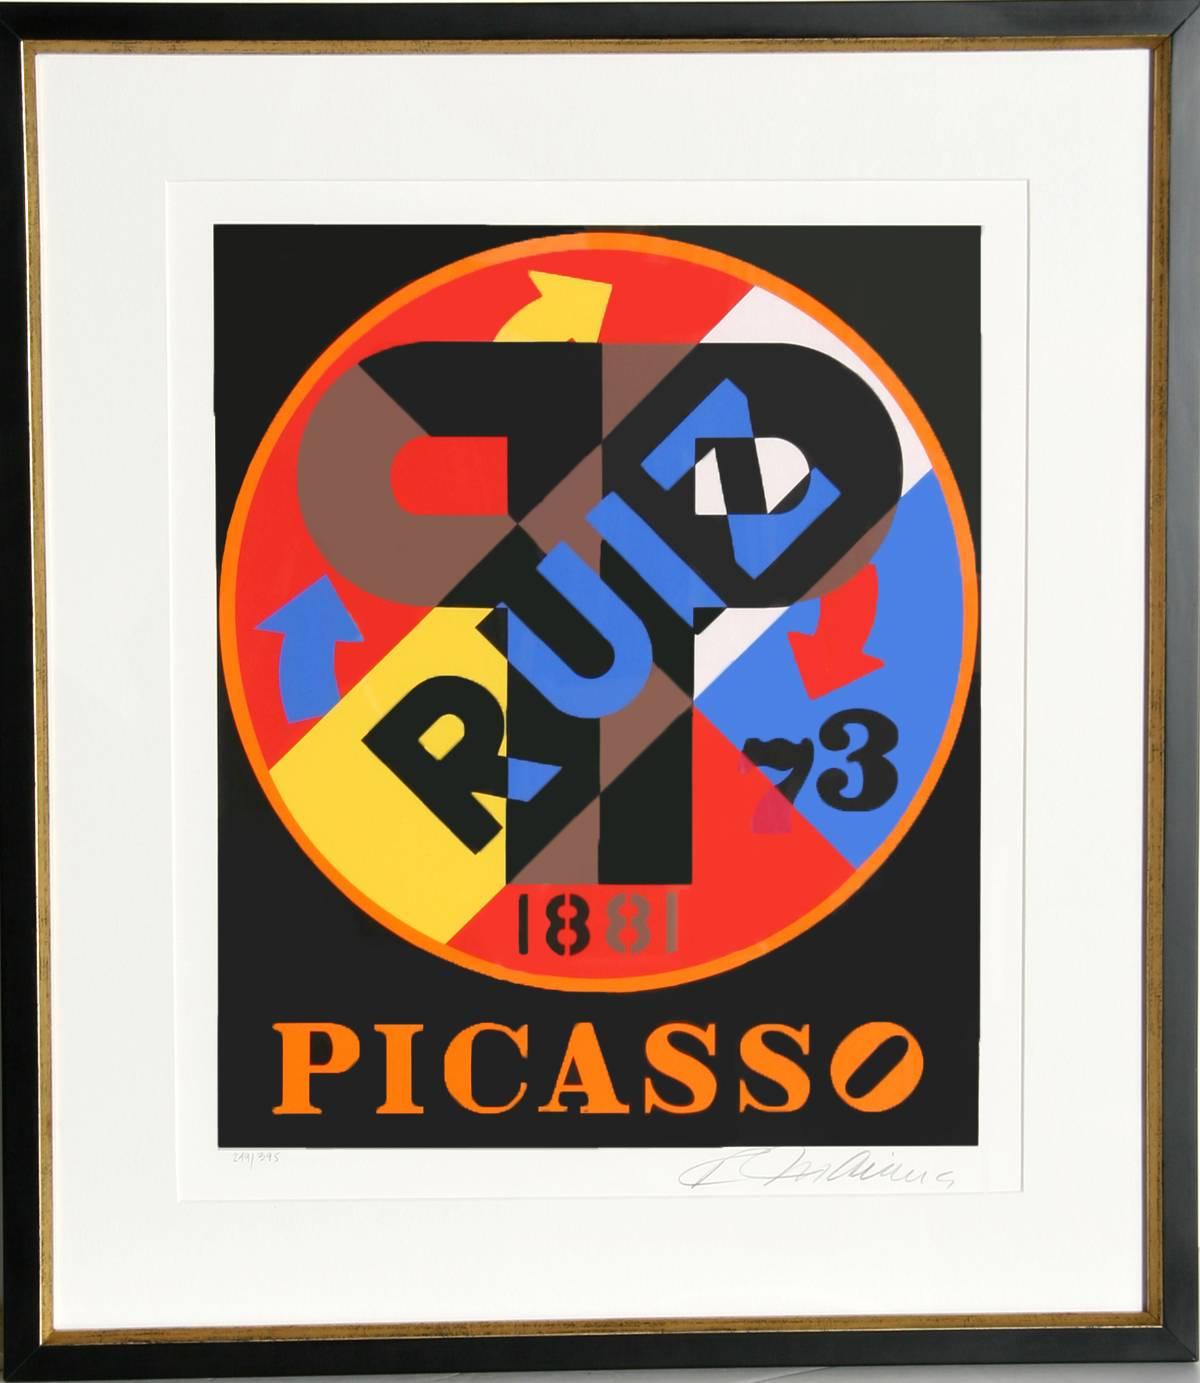 Picasso from The American Dream Portfolio, Screenprint by Robert Indiana